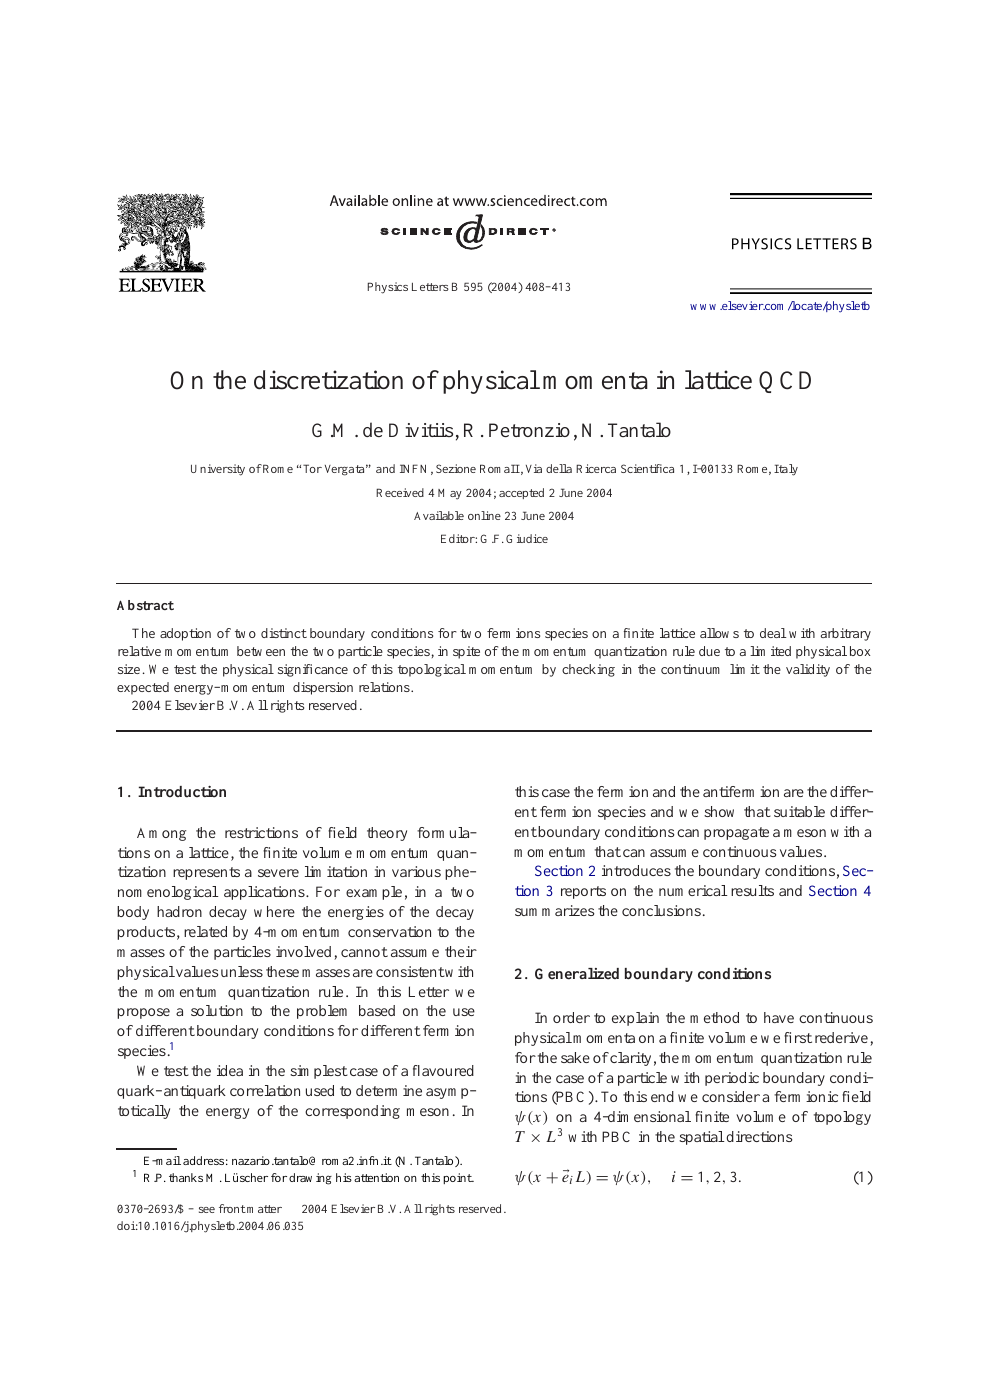 On The Discretization Of Physical Momenta In Lattice Qcd Topic Of Research Paper In Physical Sciences Download Scholarly Article Pdf And Read For Free On Cyberleninka Open Science Hub